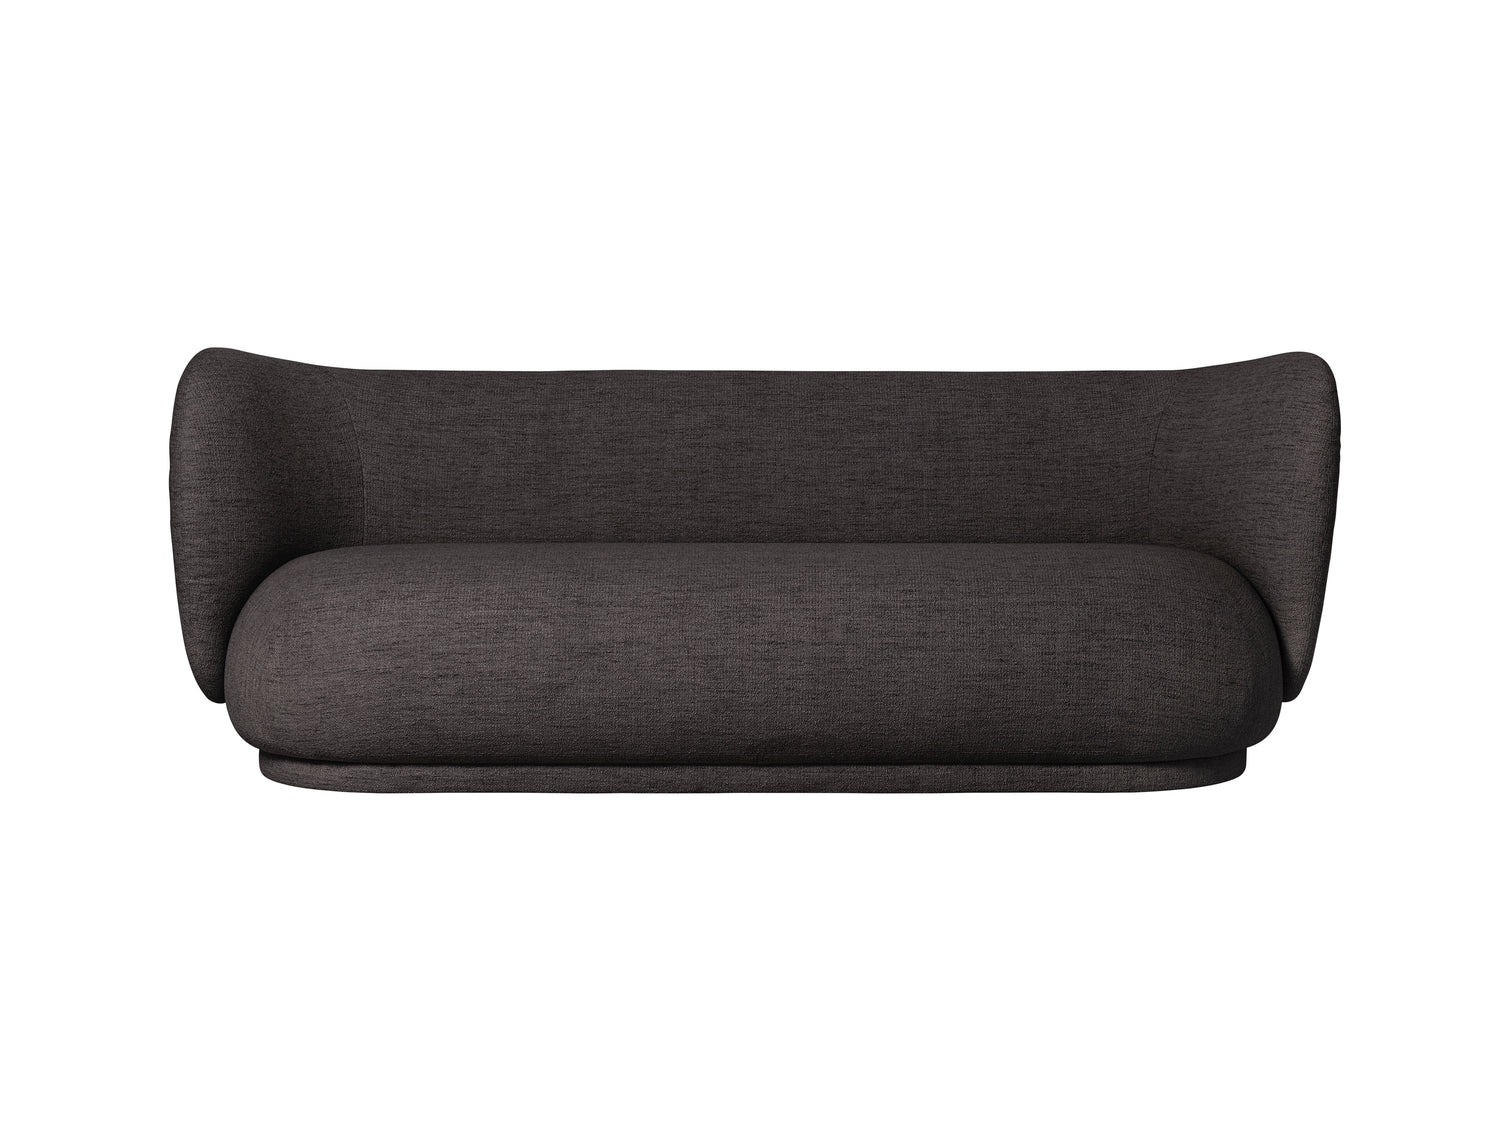 Sofa | 3 Seater Rico Couch | Bouclé fabric | Other Colours Available - Lifestory - ferm Living